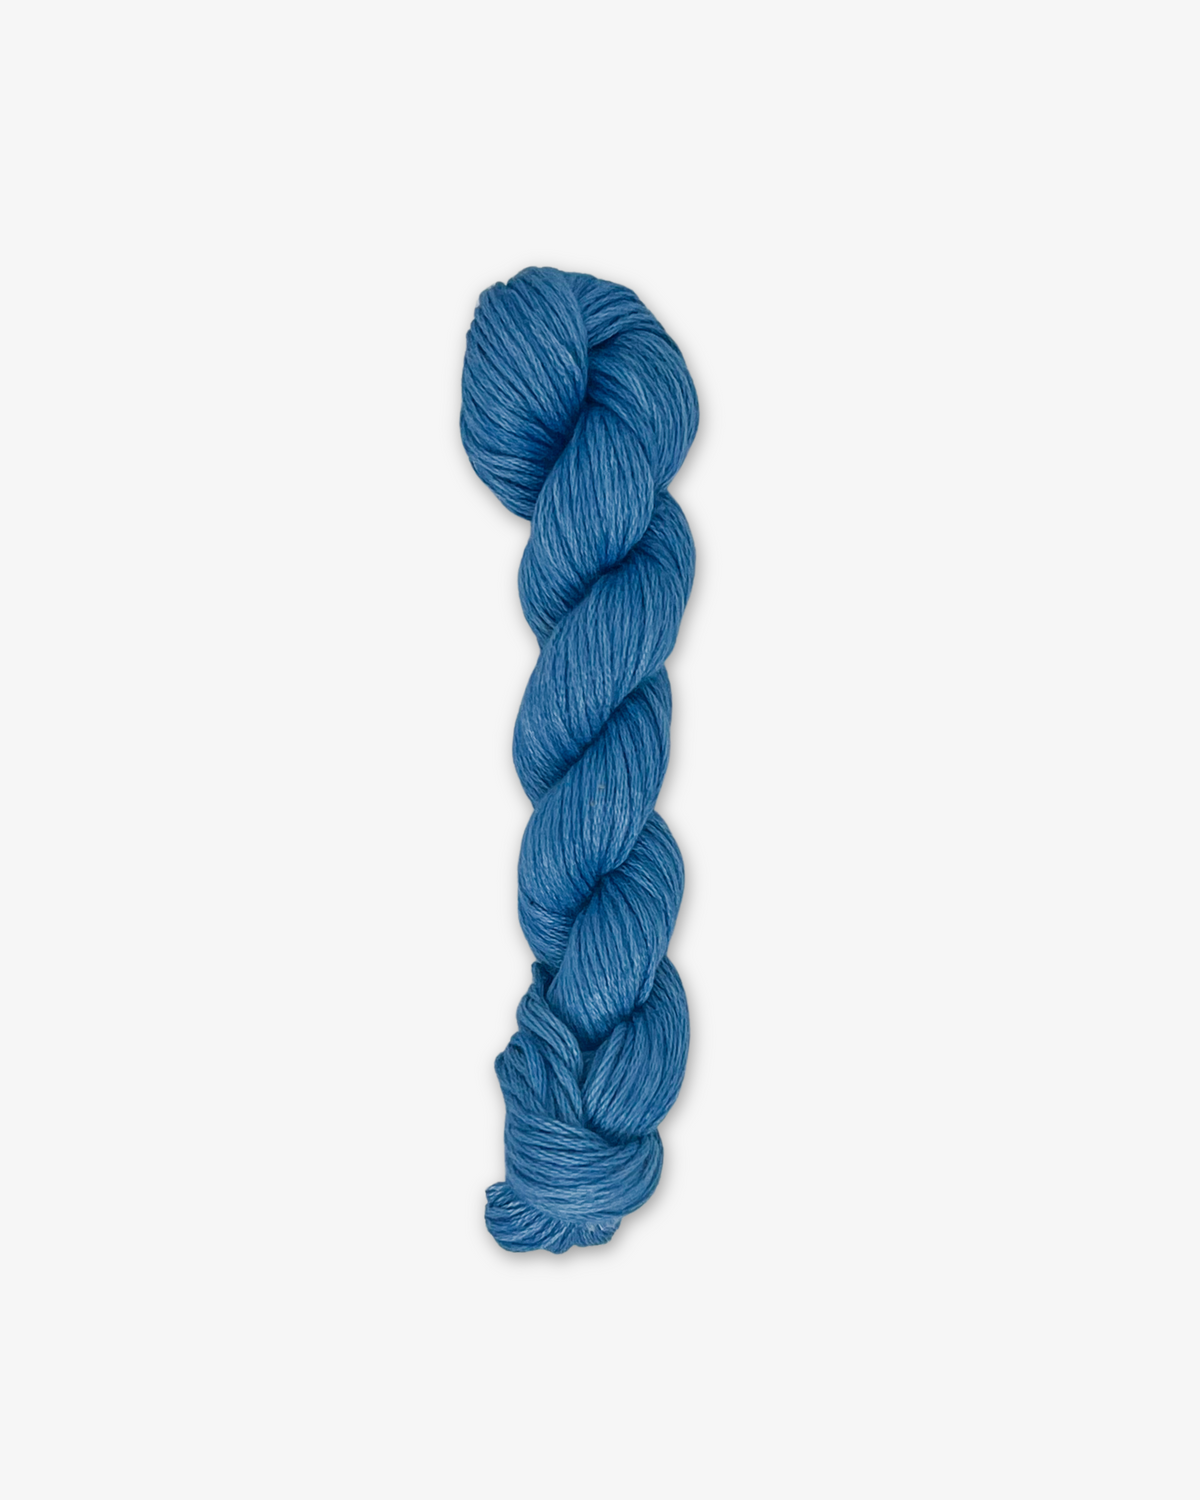 Six-Strand Cotton Threads by TATTER